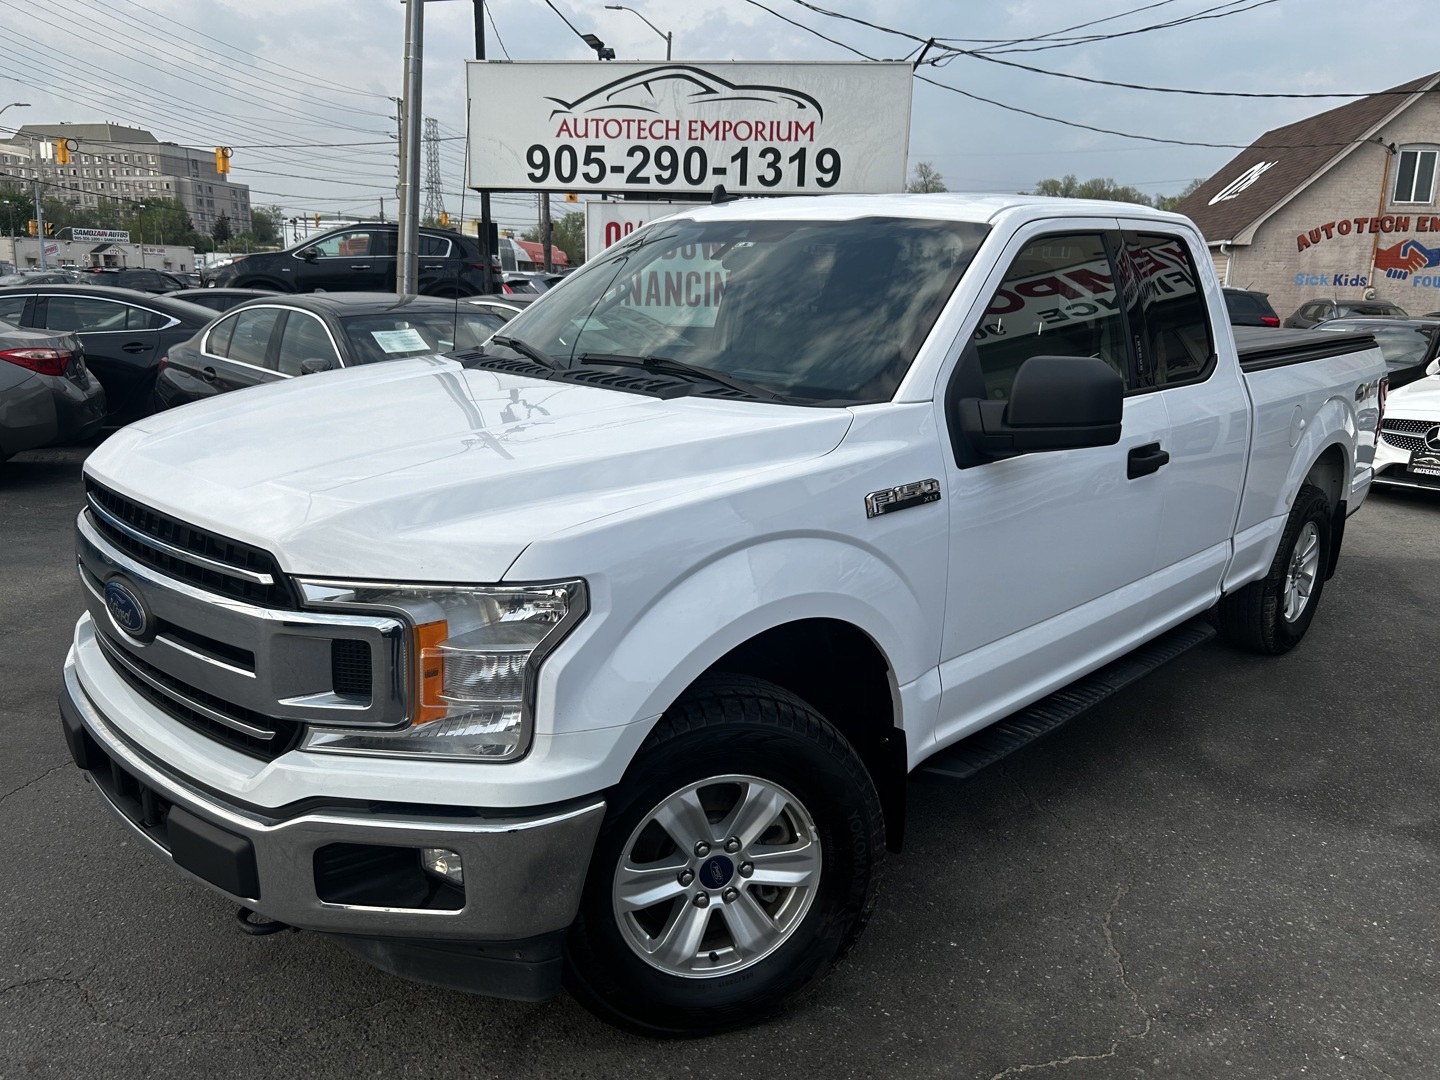 2019 Ford F-150 XLT LB EXT CAB STANDARD BED 4X4 / Reverse Camera / Cruise